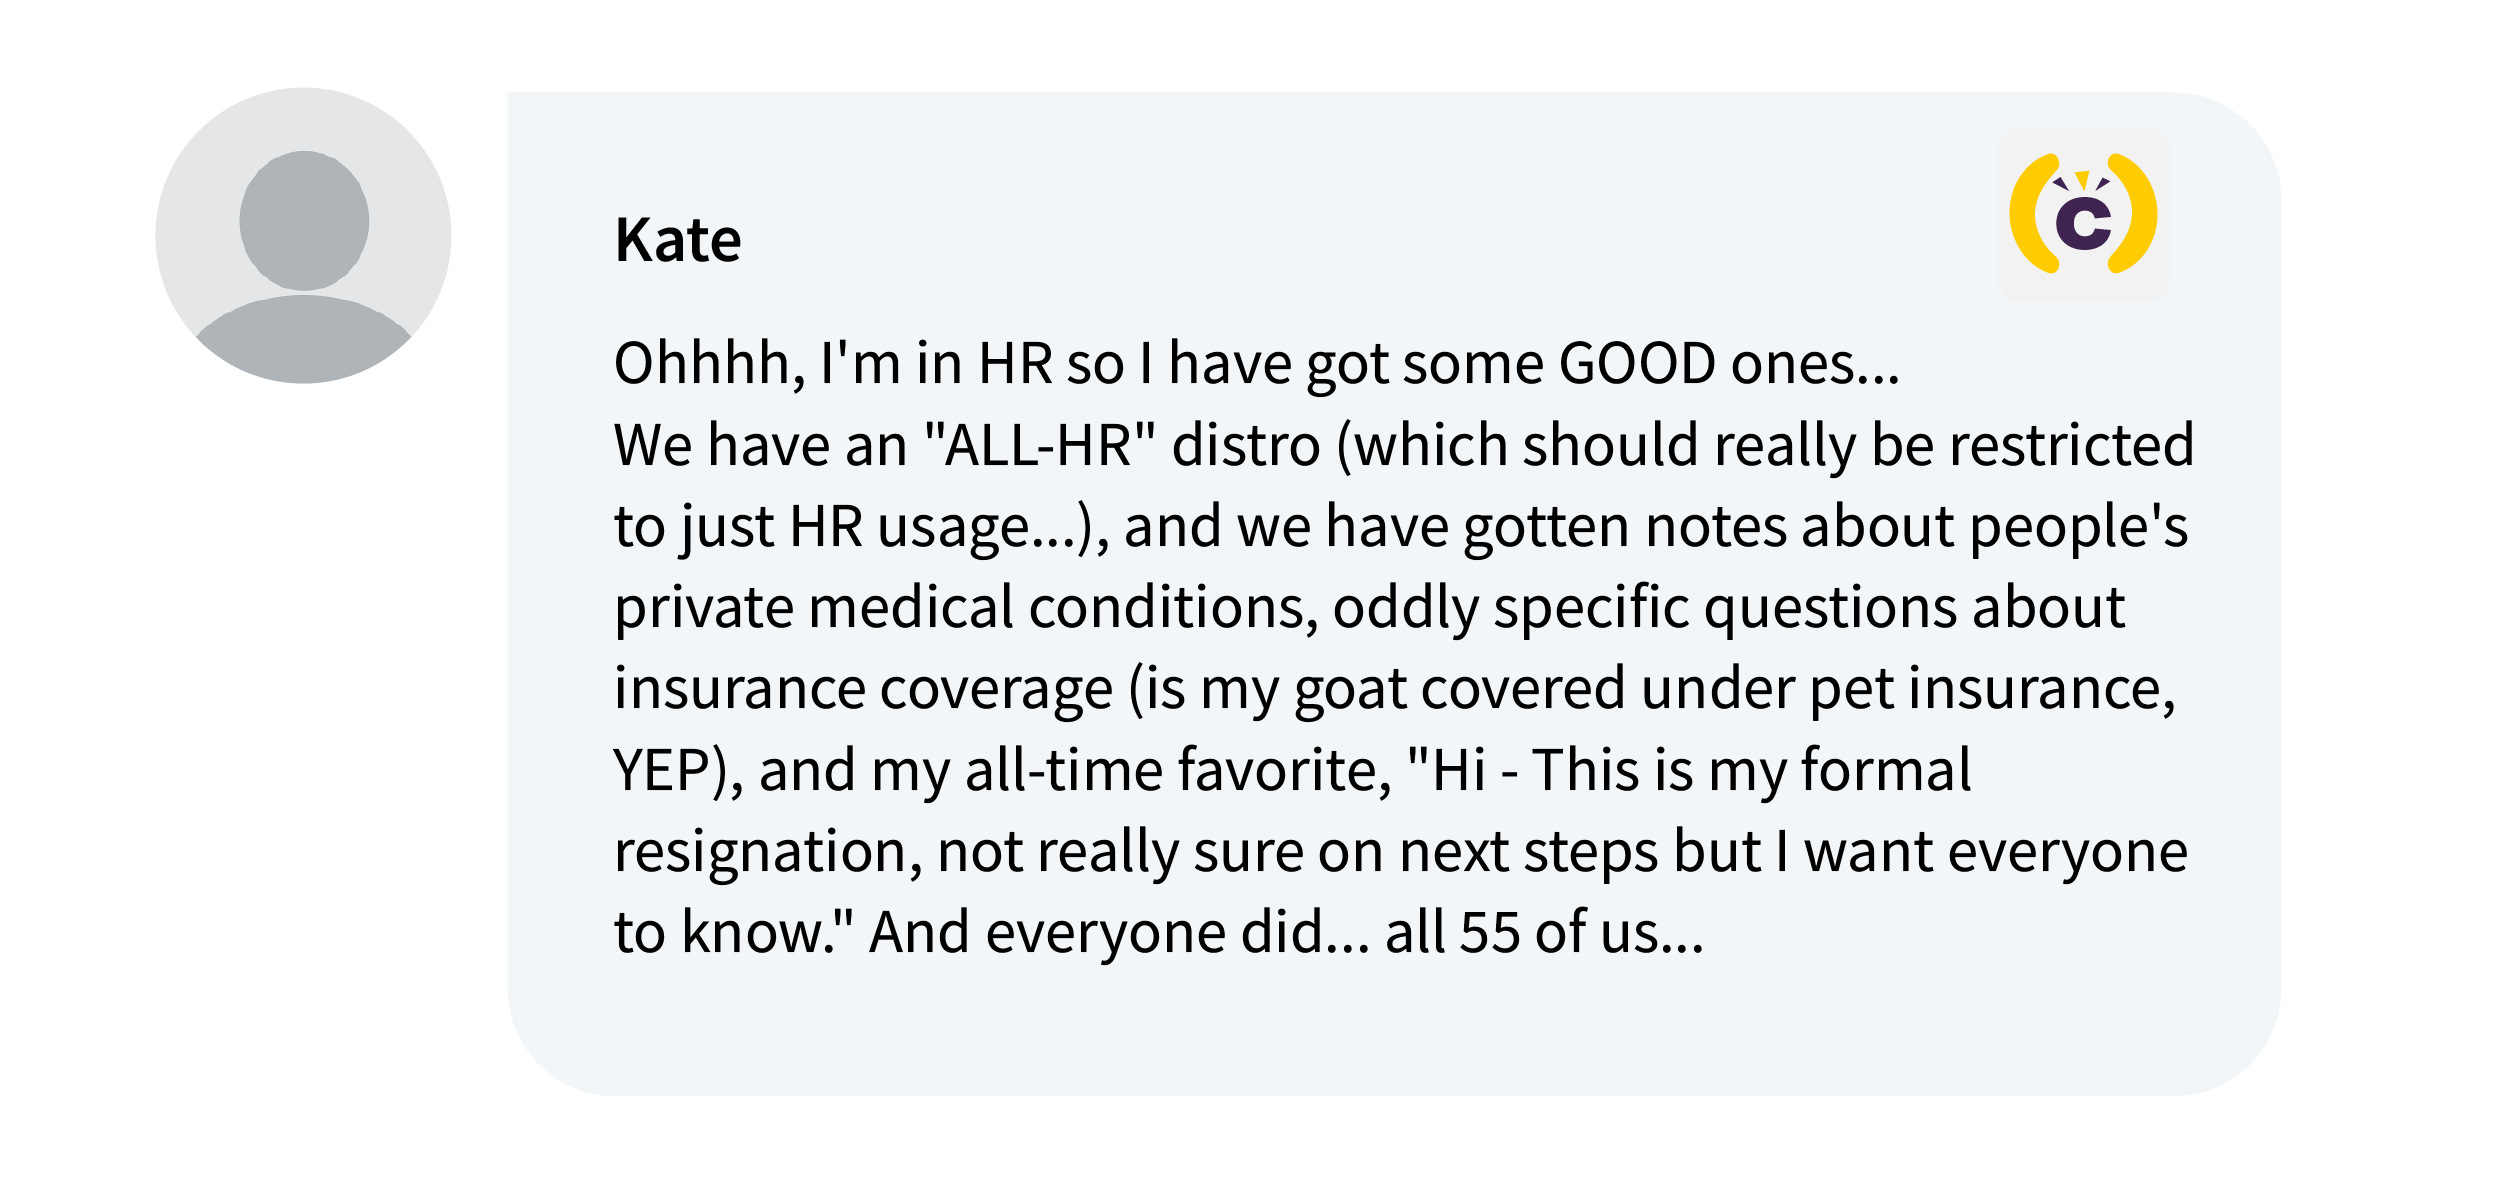 From Kate on Comms-Unity:Ohhhh, I'm in HR so I have got some GOOD ones... We have an "ALL-HR" distro (which should really be restricted to just HR usage...), and we have gotten notes about people's private medical conditions, oddly specific questions about insurance coverage (is my goat covered under pet insurance, YEP), and my all-time favorite, "Hi - This is my formal resignation, not really sure on next steps but I want everyone to know." And everyone did... all 55 of us...